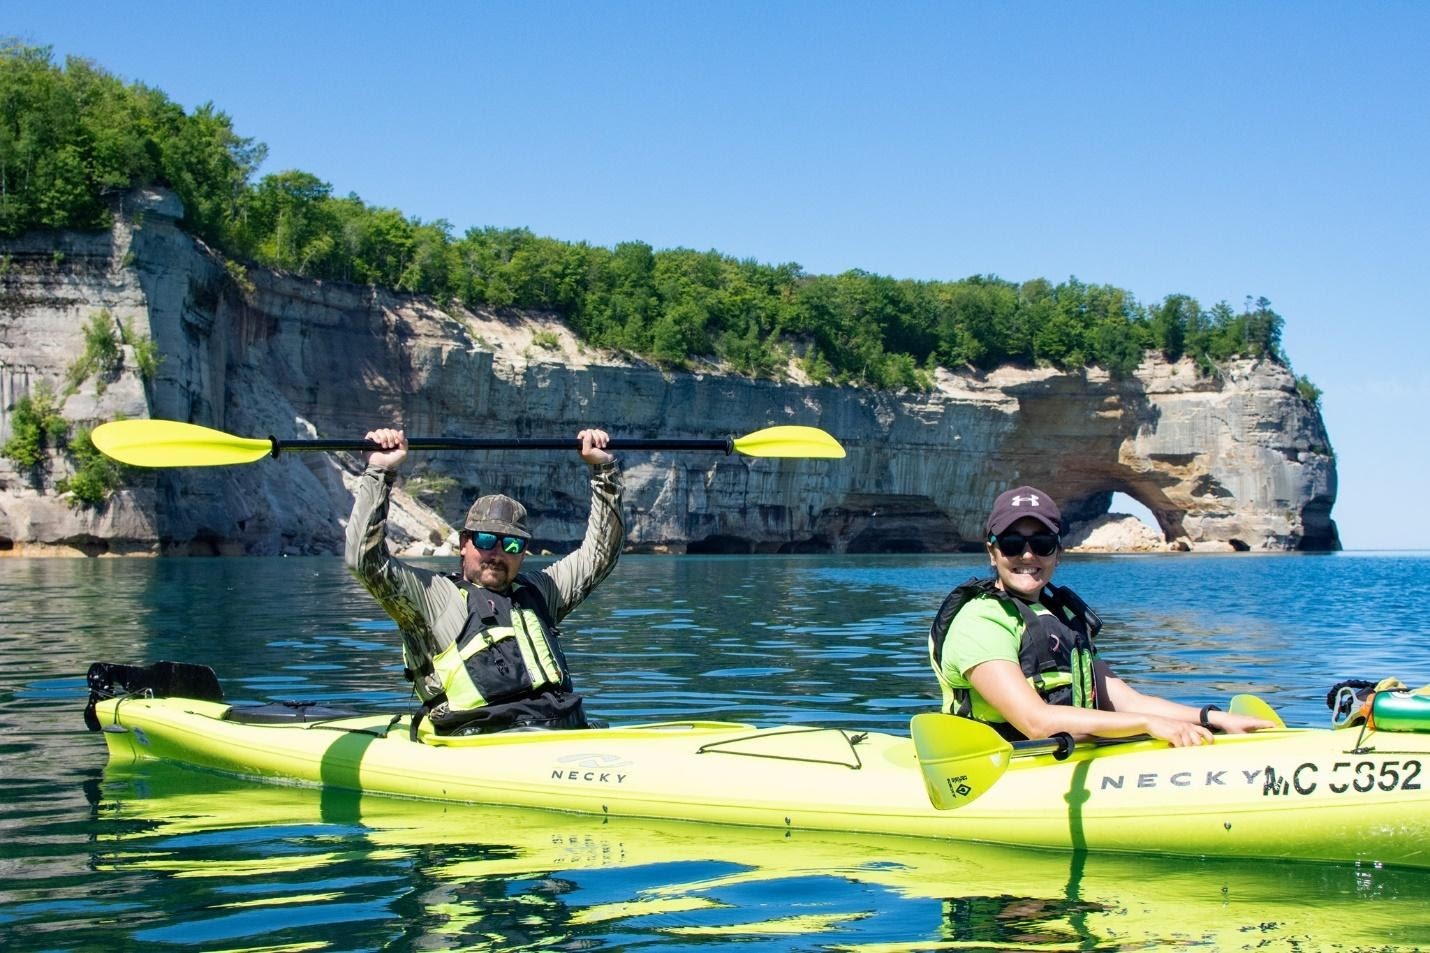 Grand Portal Point in the distance. PC: Pictured Rocks Kayaking.